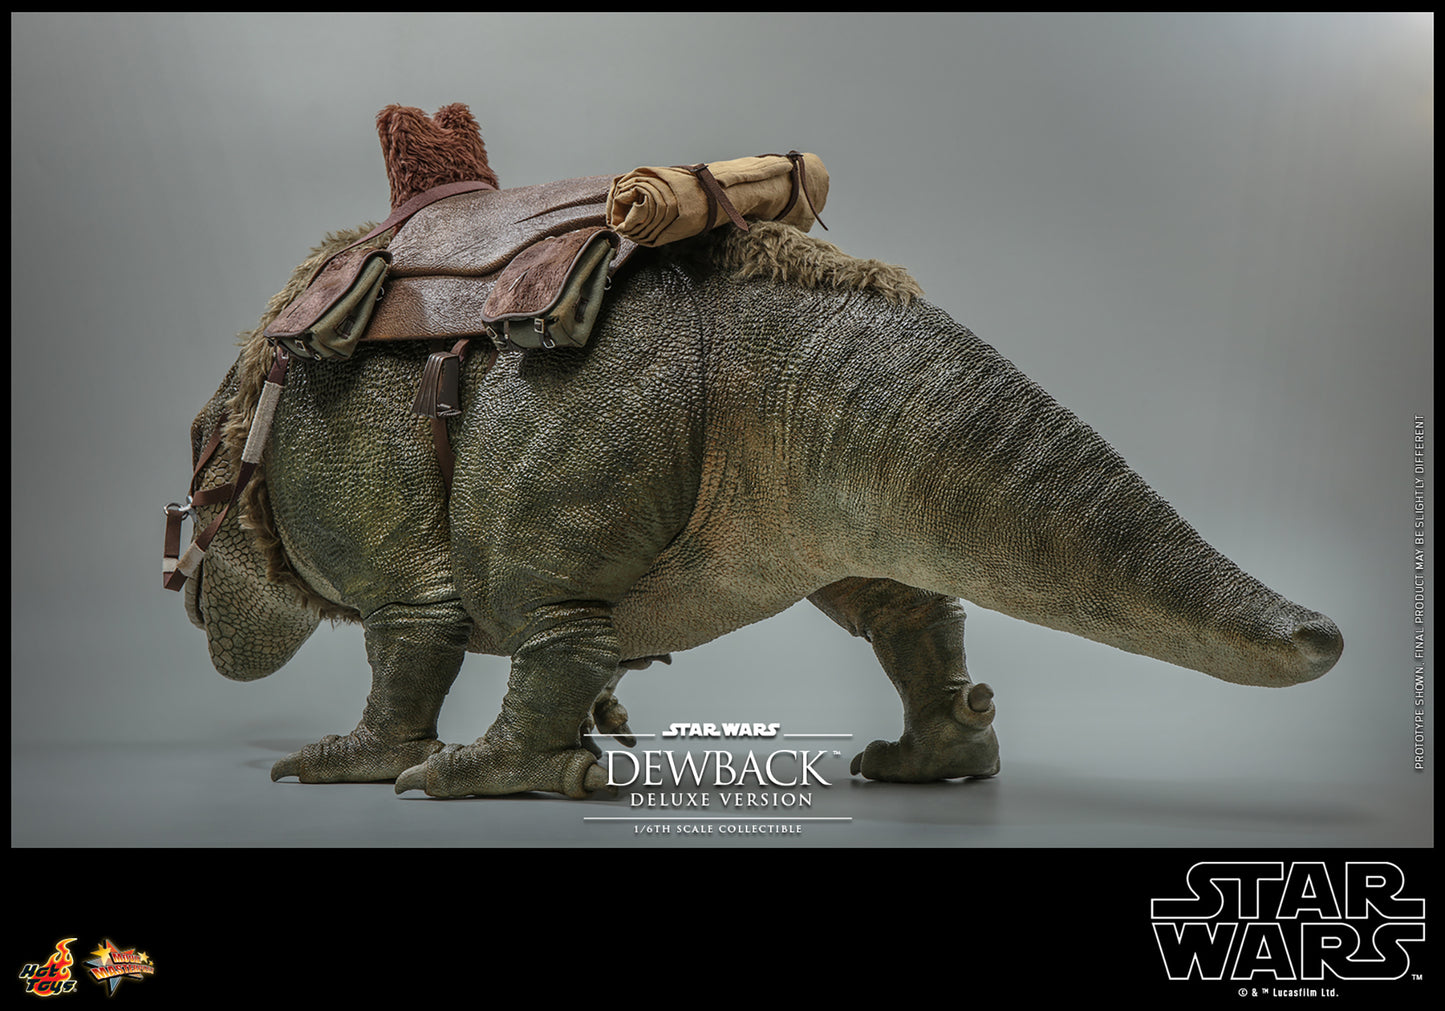 Dewback (Deluxe Version) 1/6 Scale Figure by Hot Toys